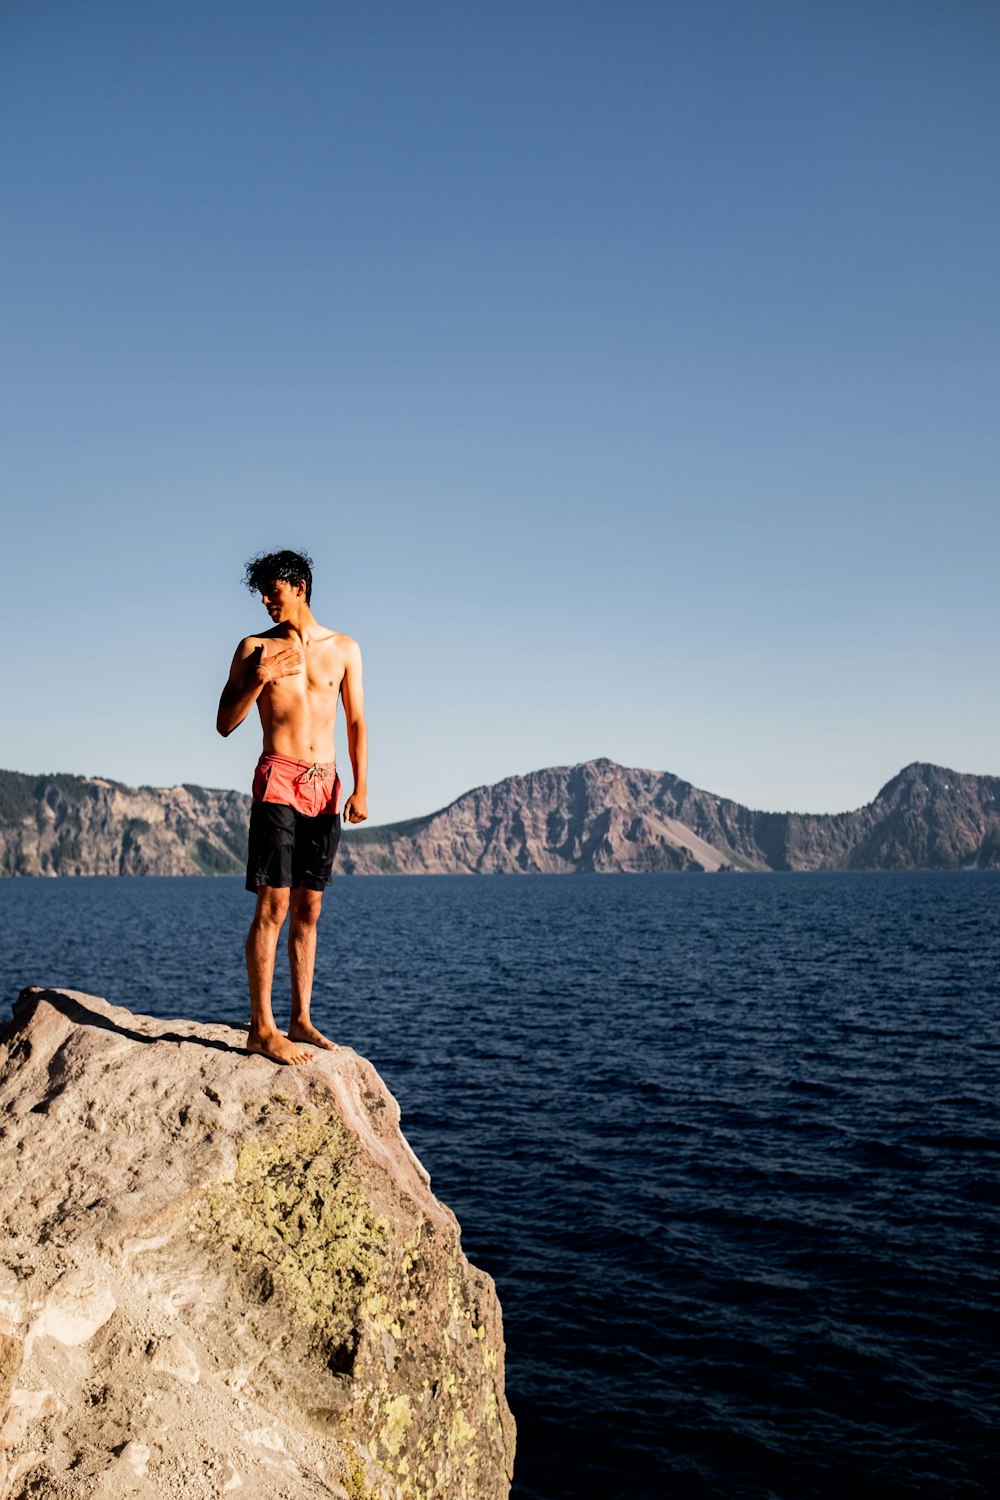 man in black shorts standing on rock formation near body of water during daytime